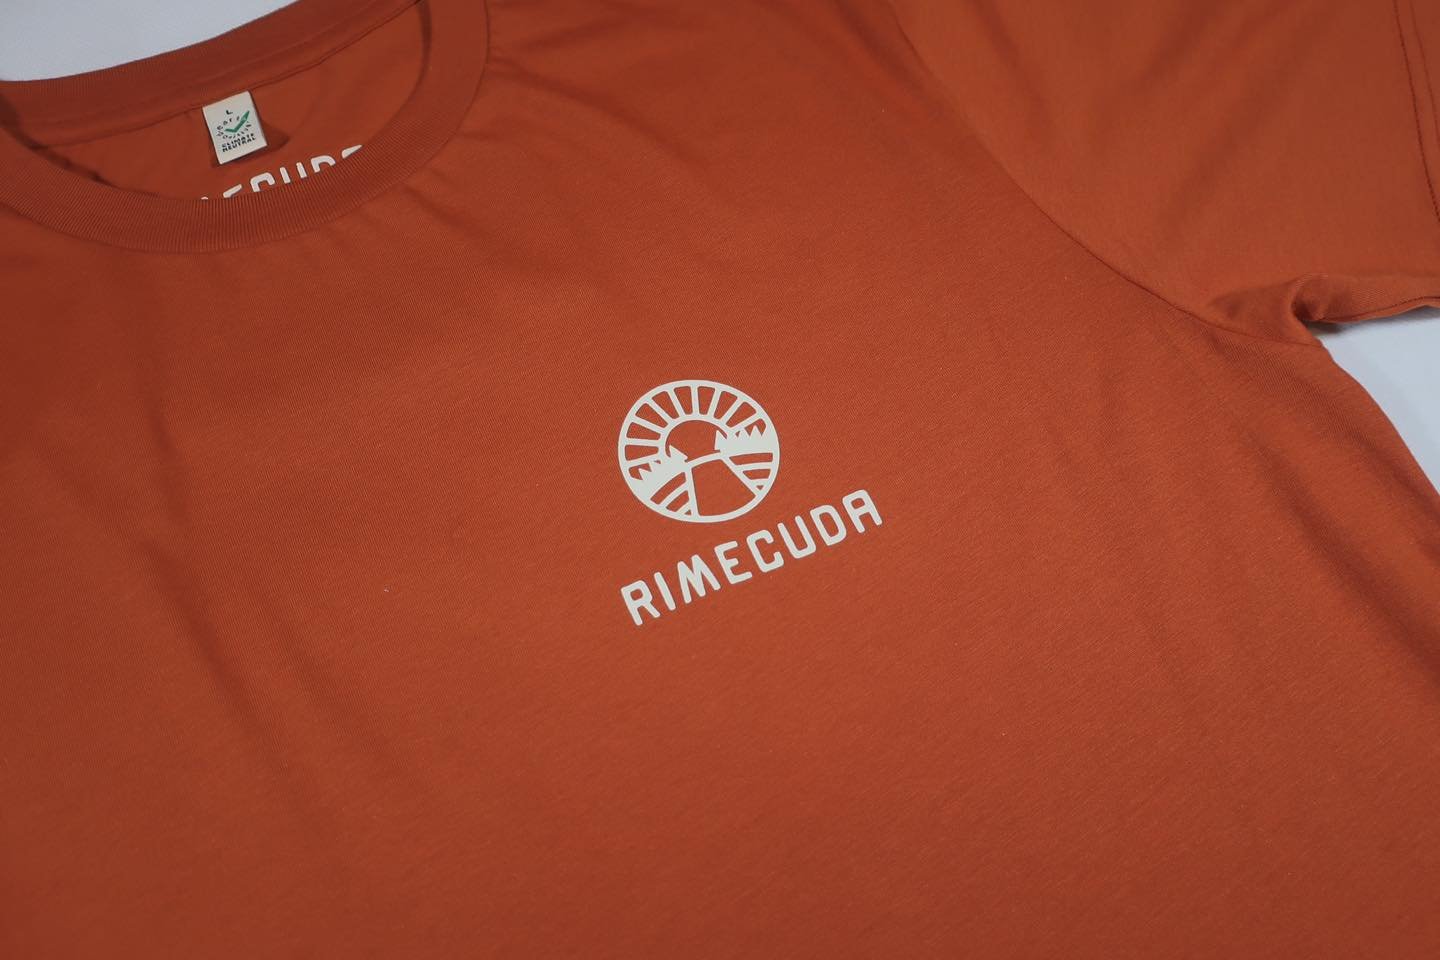 New T-shirts have landed ready for spring/summer. 
New colours and new designs, full range online soon! 

#ride #walk #adventure #skate #southcoast #fish #newforestnationalpark #outdoors #rimecuda #explore #screenprinting #clothing #outside #unisex #